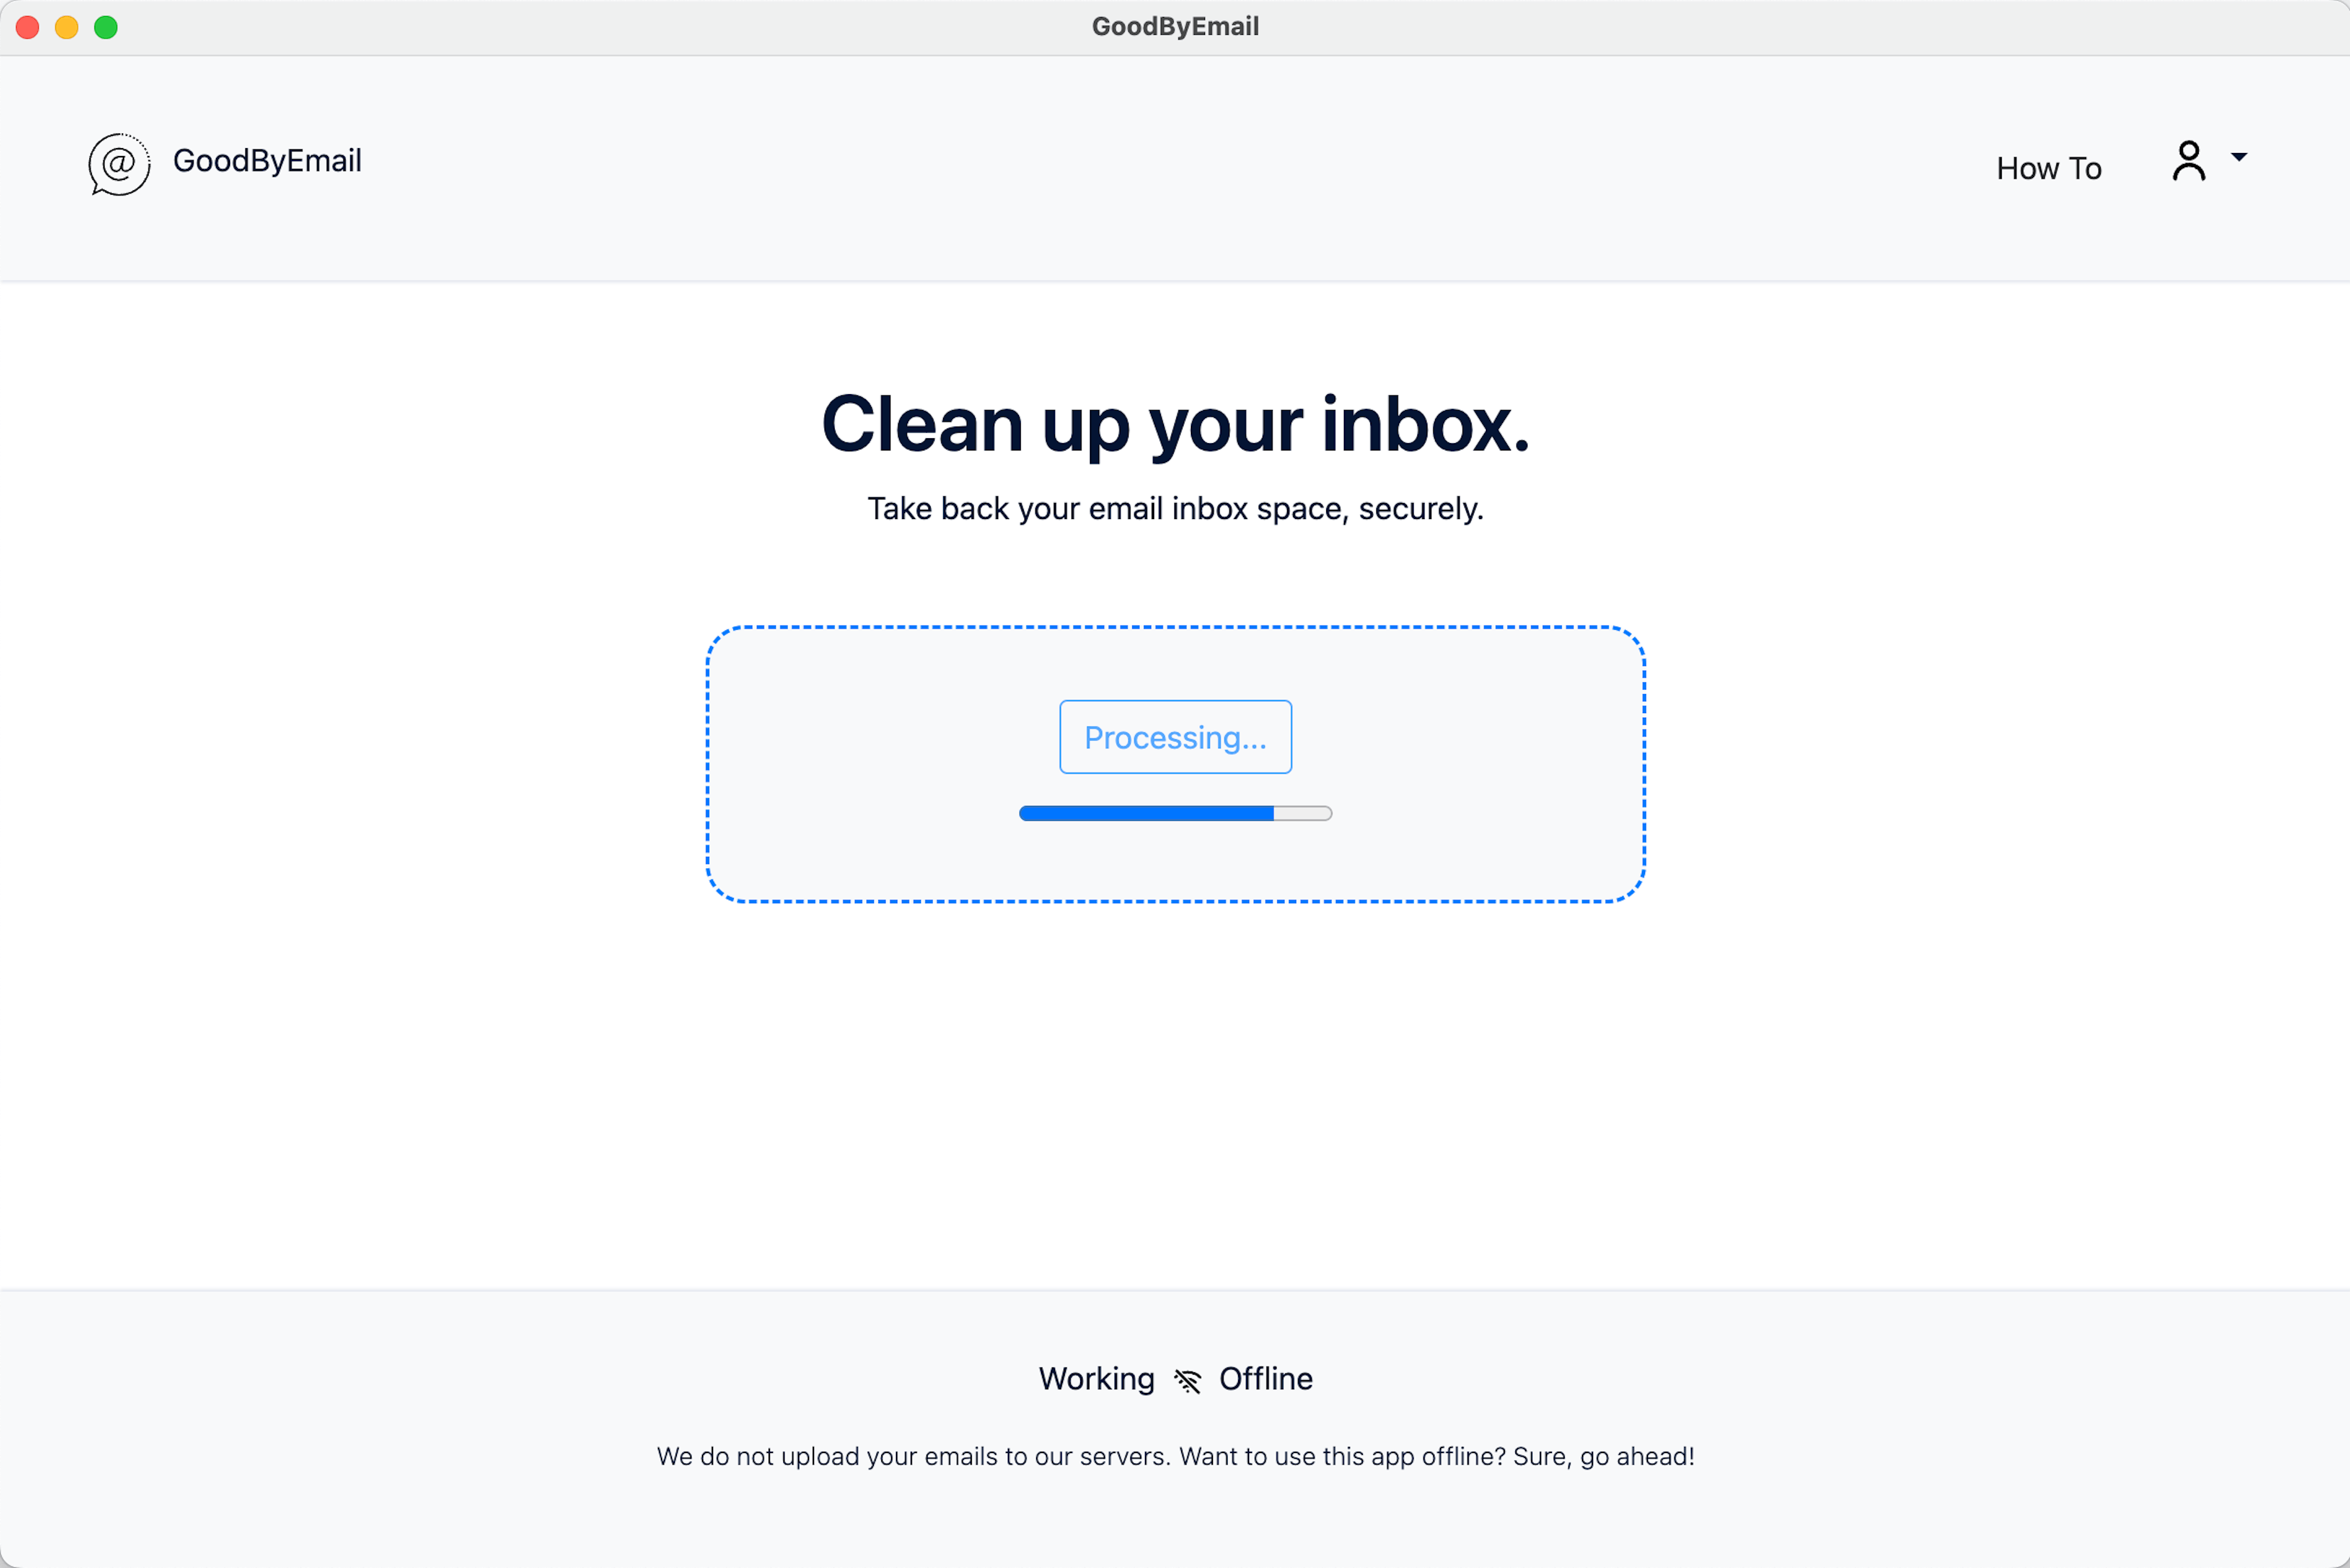 GoodByEmail features